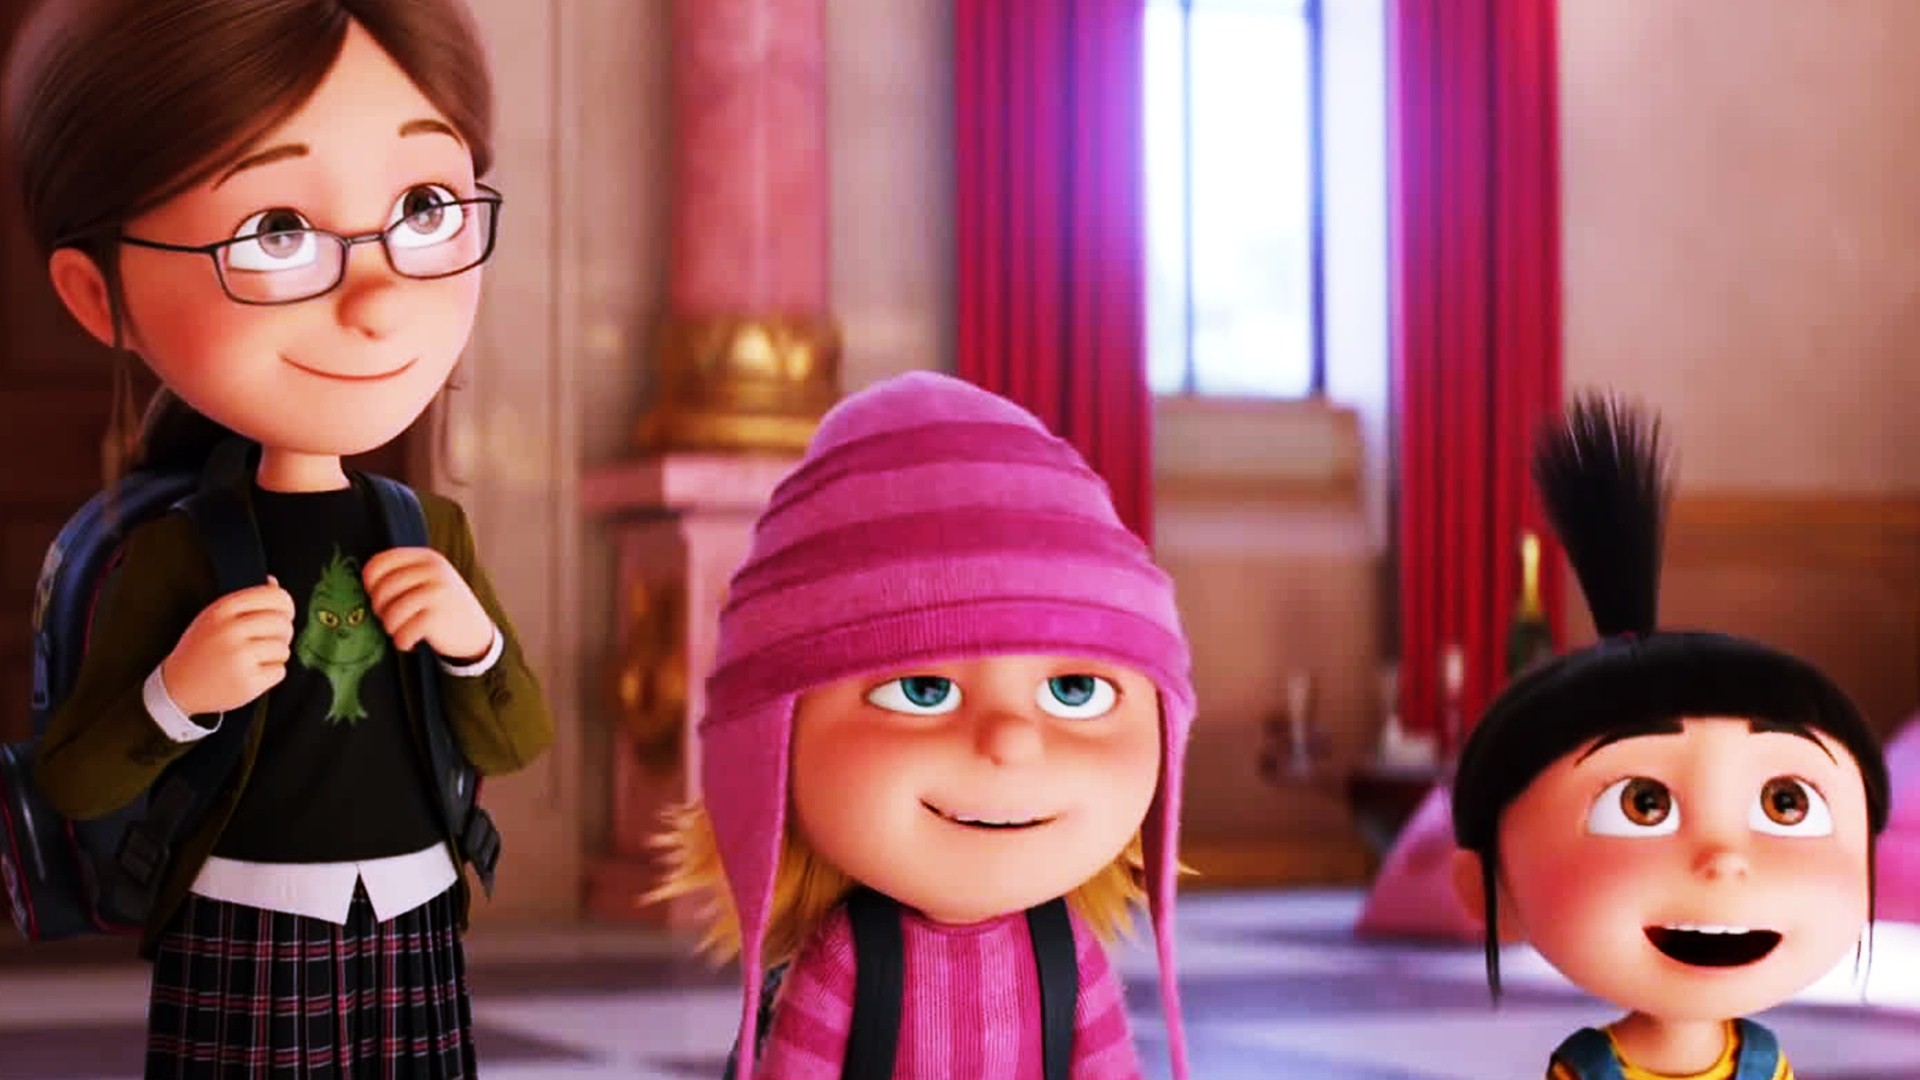 Sisters In Despicable Me 3 Wallpaper.